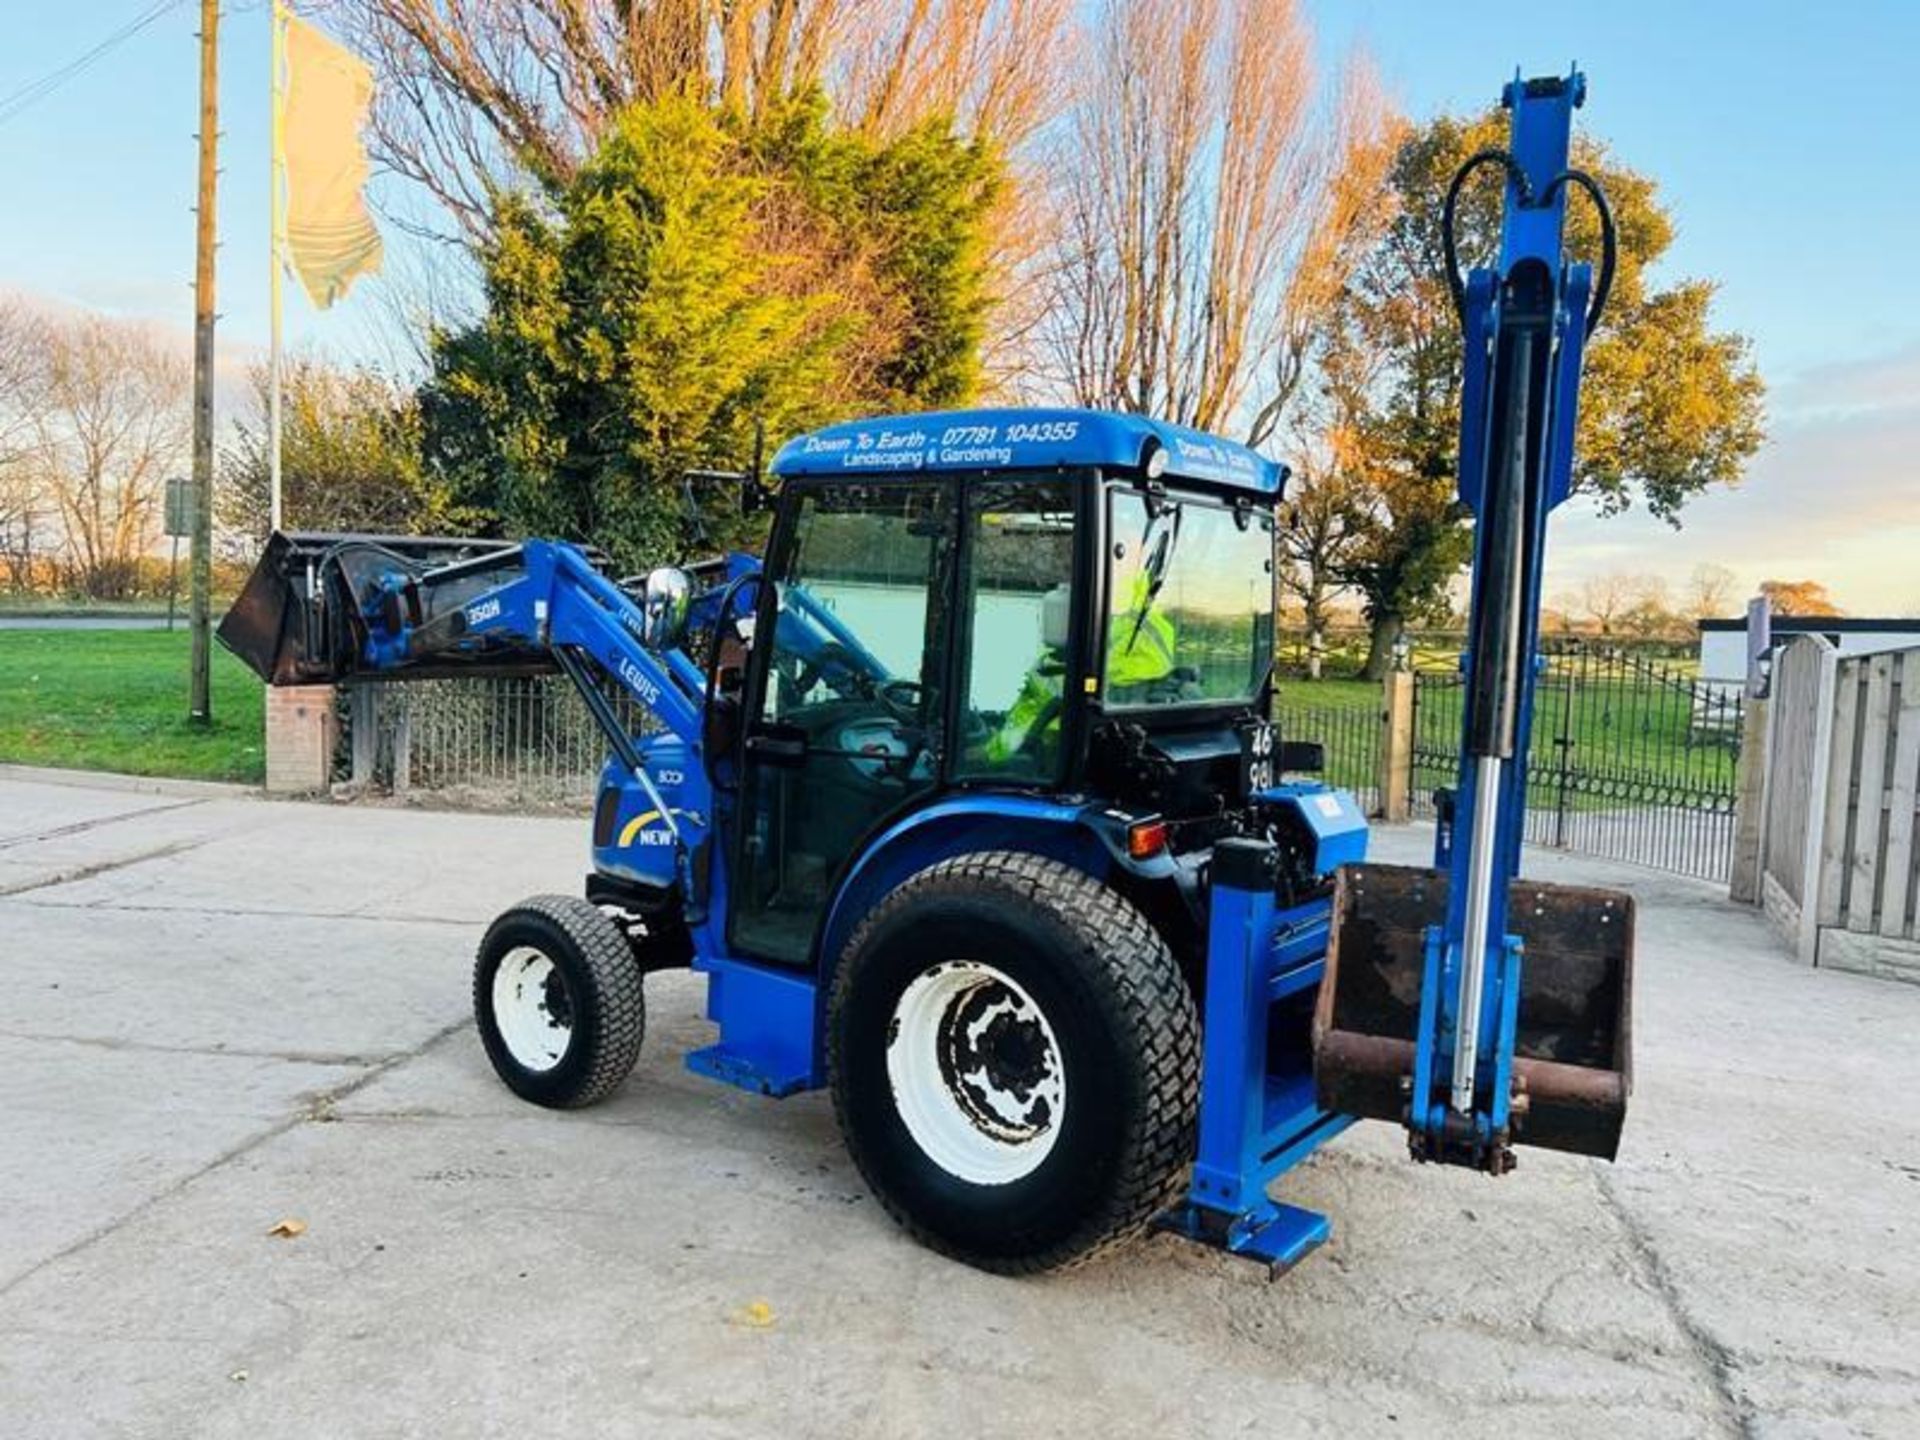 NEW HOLLAND BOOMER 40 4WD TRACTOR *YEAR 2014, ONLY 737 HRS* C/W LOADER & BACK TACTOR - Image 2 of 19